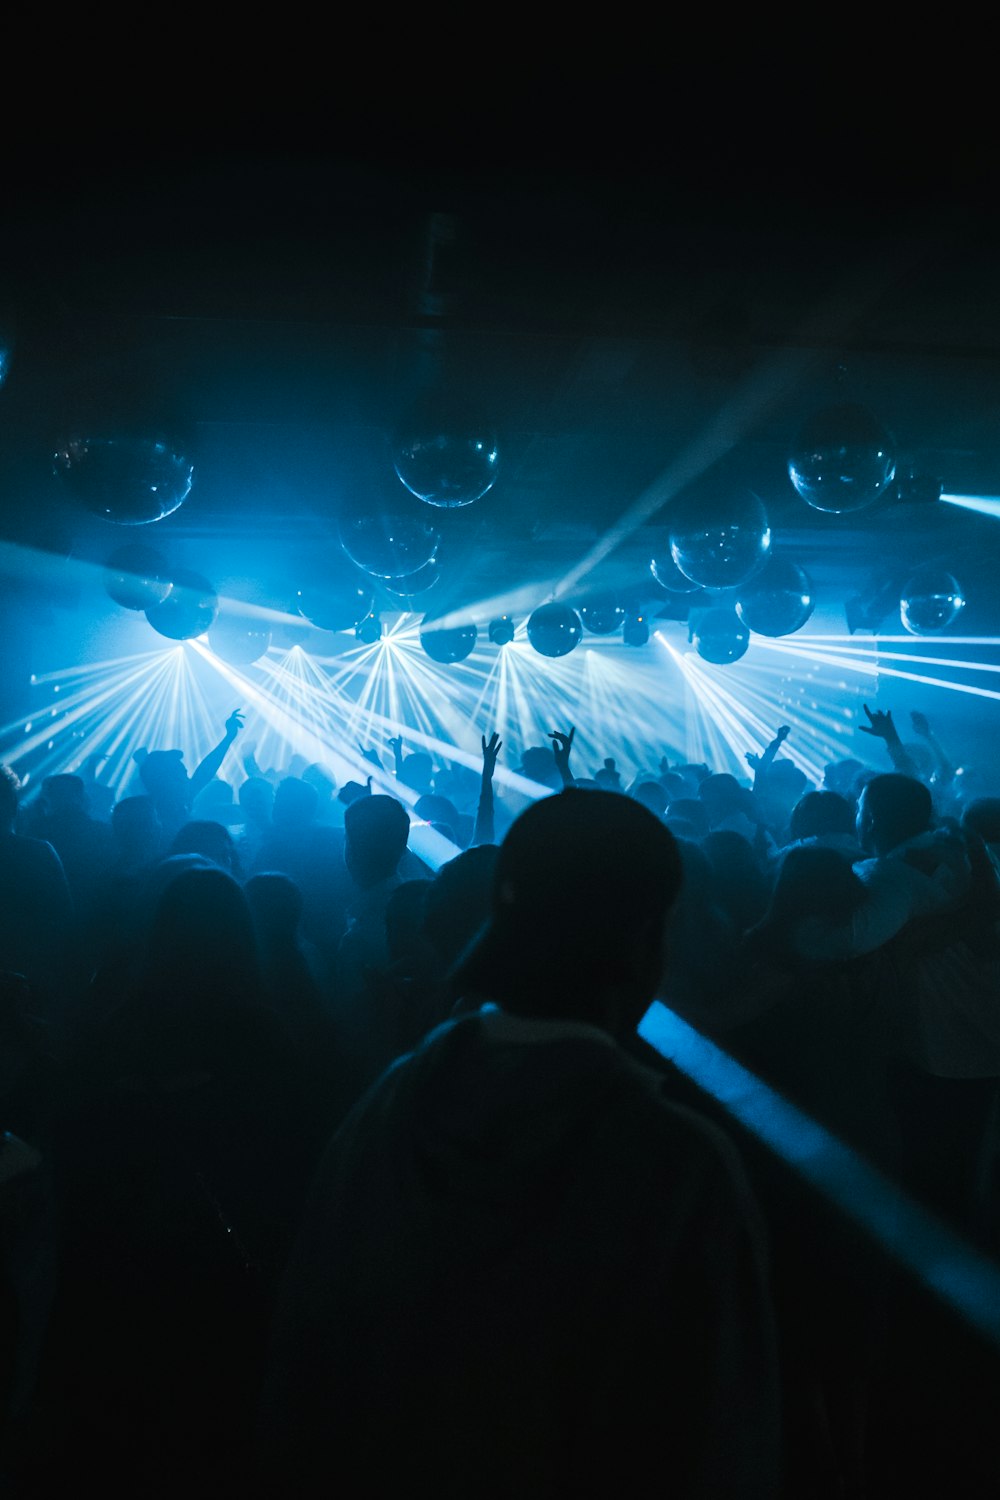 100+ Night Club Pictures [HD] | Download Free Images on Unsplash